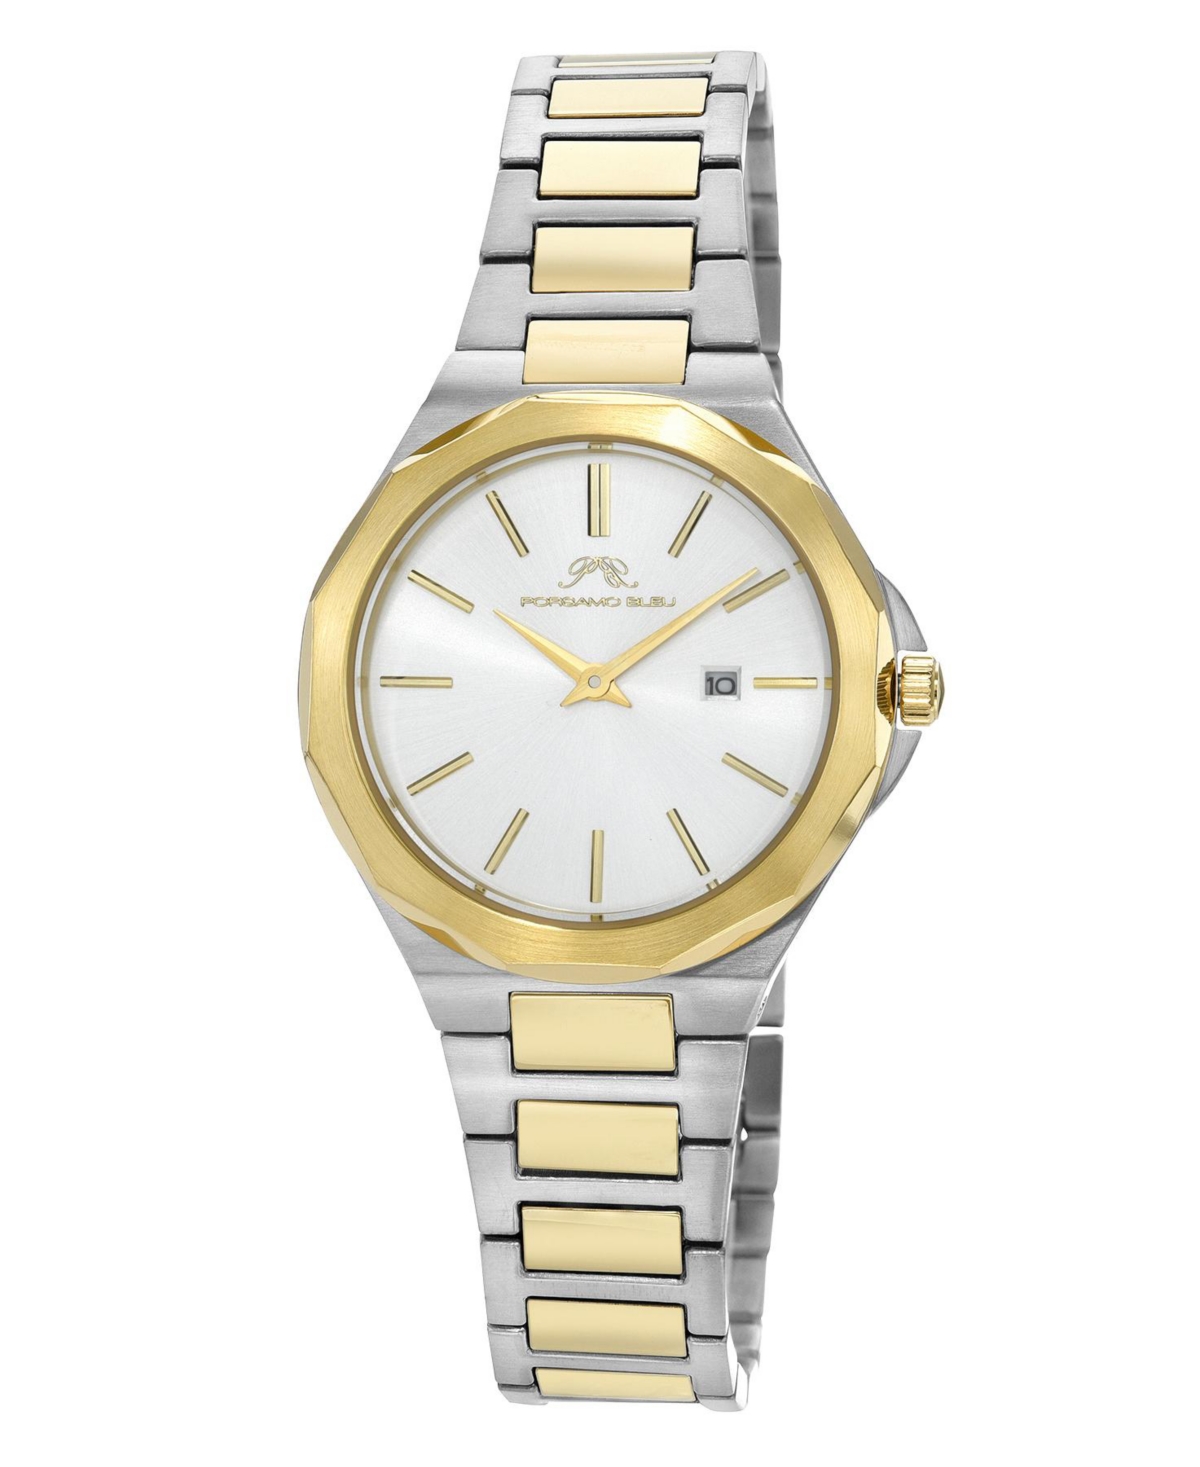 Victoria Stainless Steel Two Tone Women's Watch 1241CVIS - Two-tone